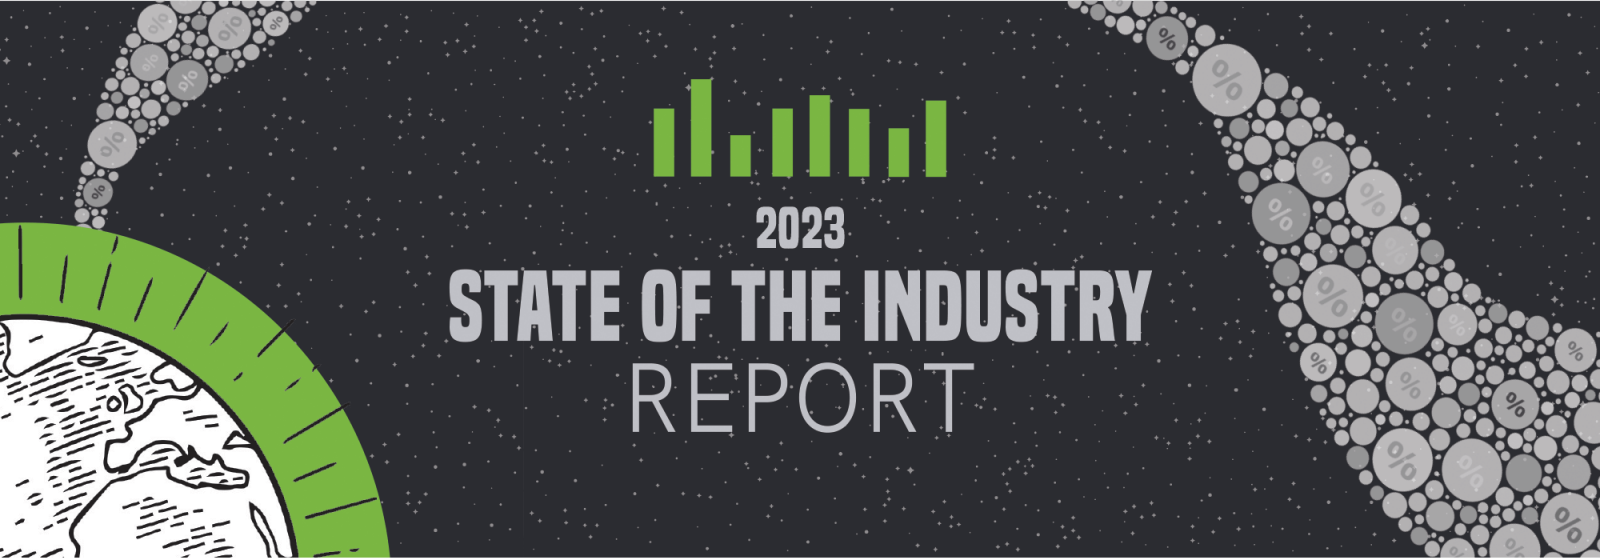 2023 State of the Industry Report